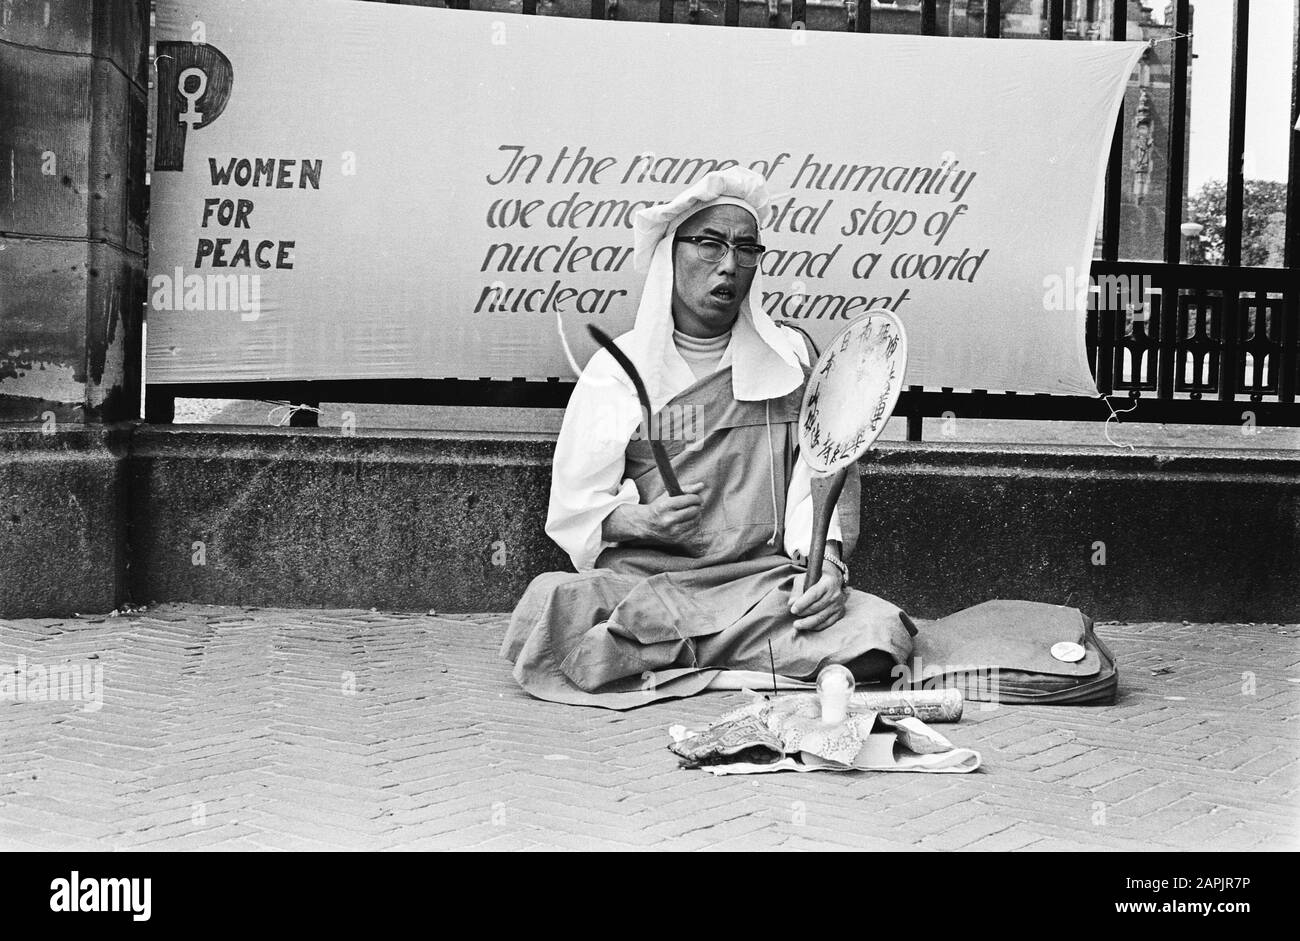 Demonstration of Women for Peace for the Peace Palace in The Hague because 35 years ago an atomic bomb fell on Hiroshima: a praying monk Date: 6 August 1980 Location: The Hague, Zuid- Holland Keywords: demonstrations, nuclear weapons, monks, peace movement Stock Photo